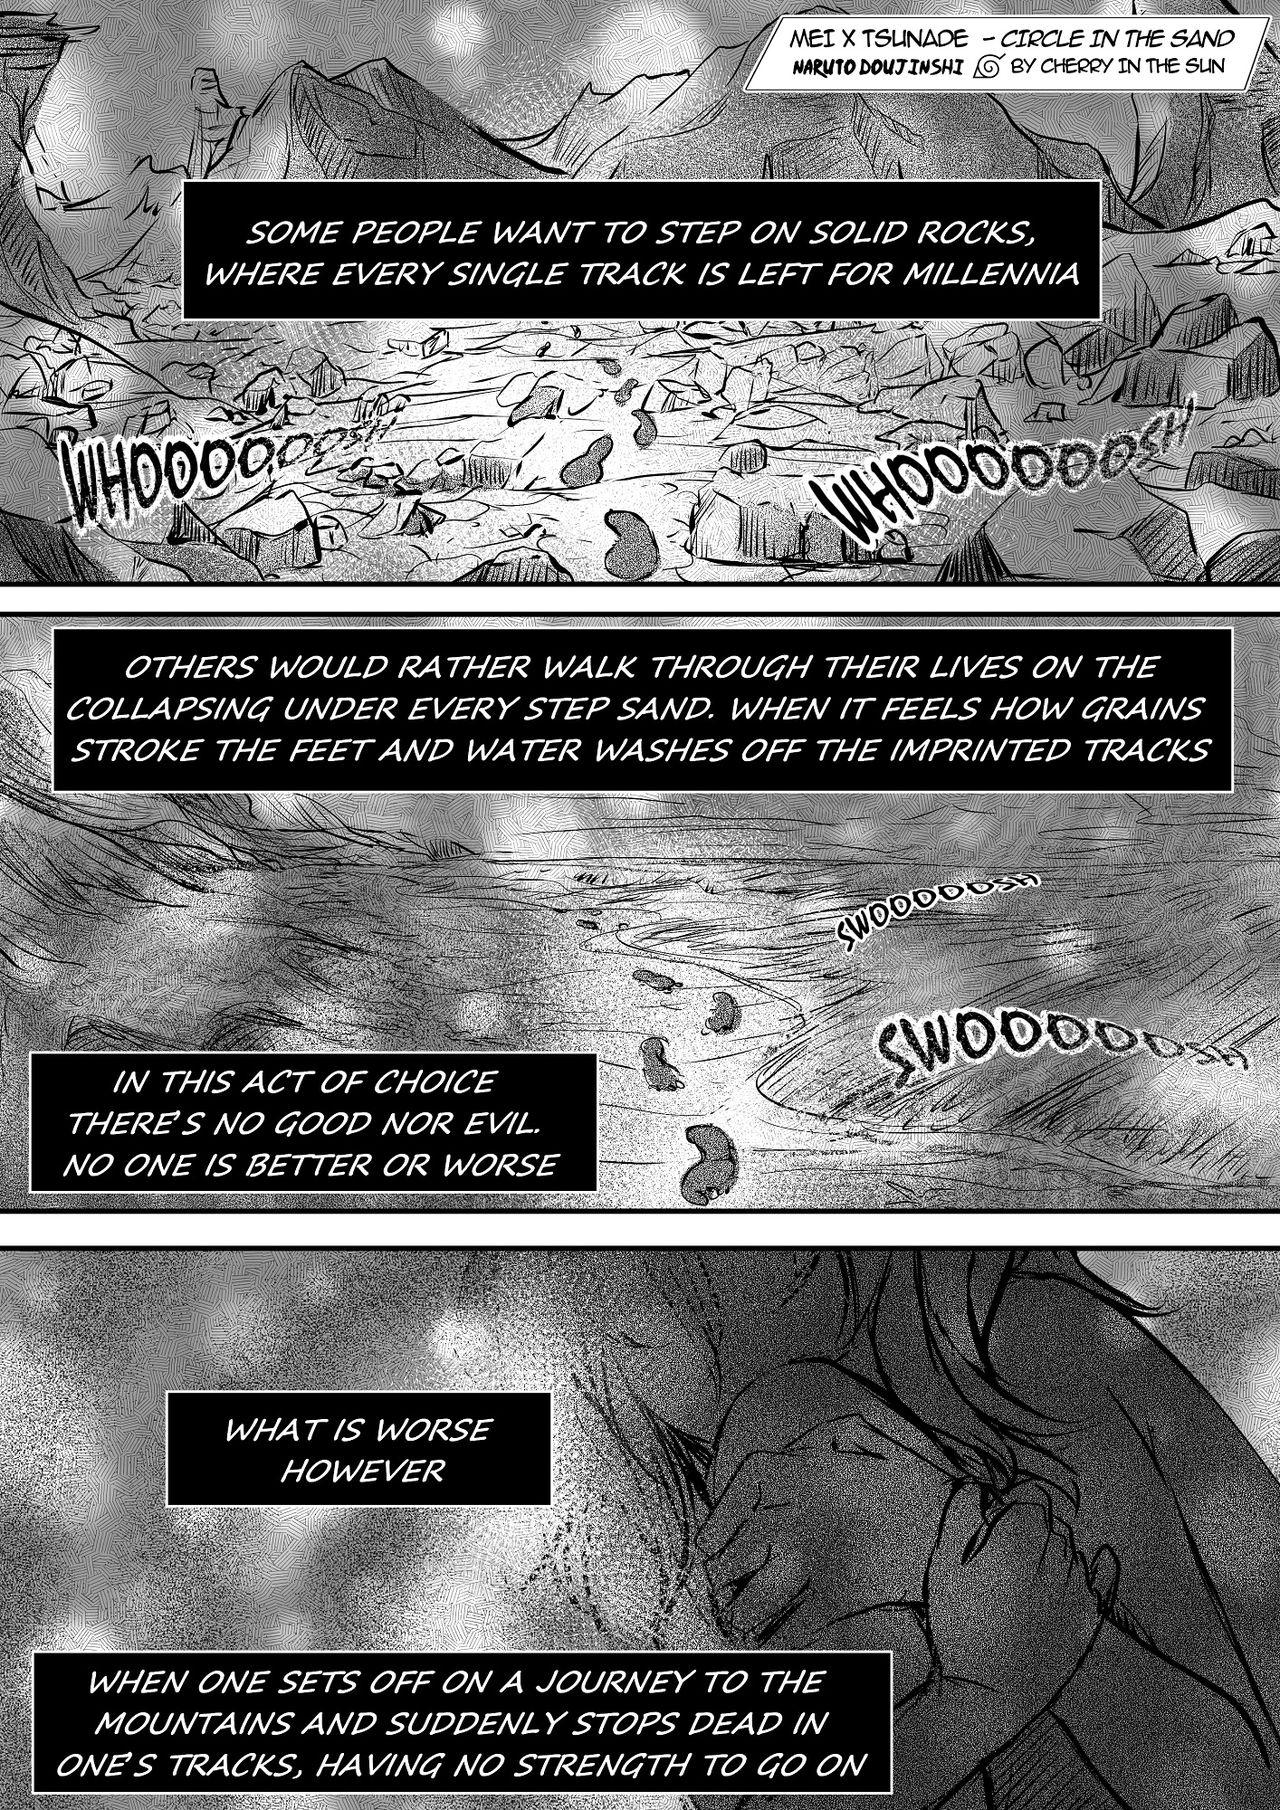 Hotporn Circle in the Sand - Naruto Seduction - Page 2